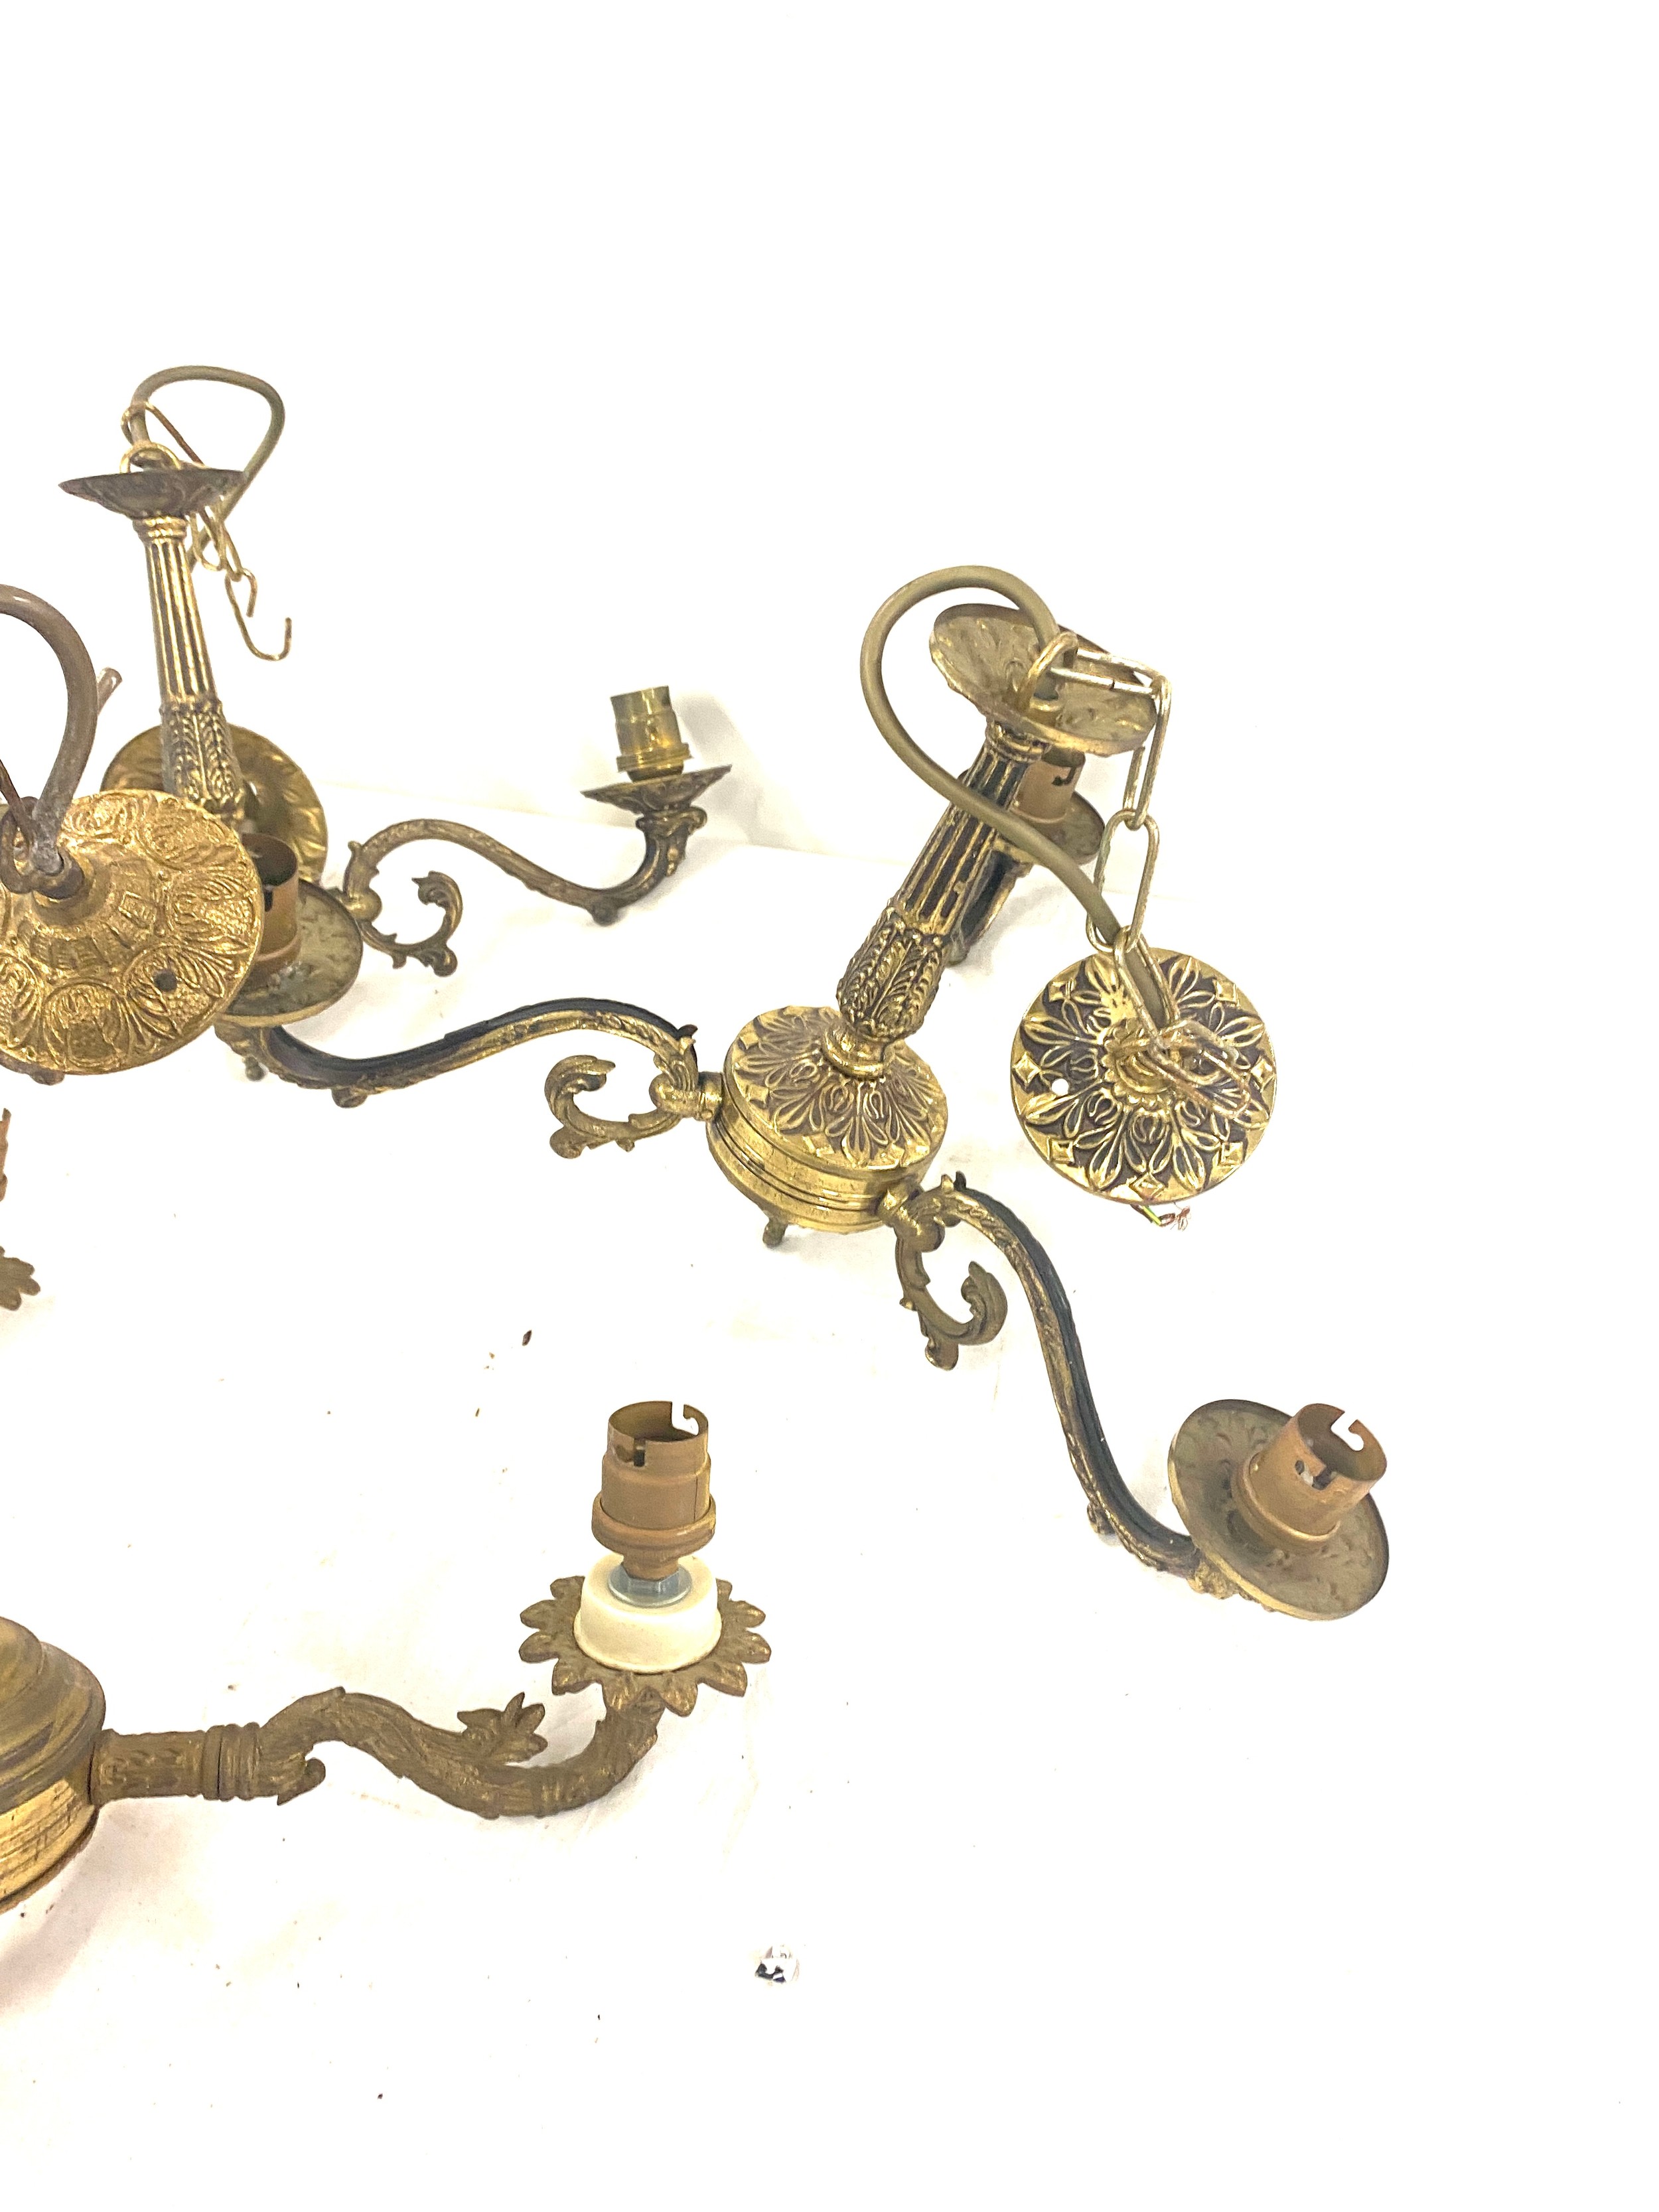 4 Brass ceiling lights - Image 2 of 3